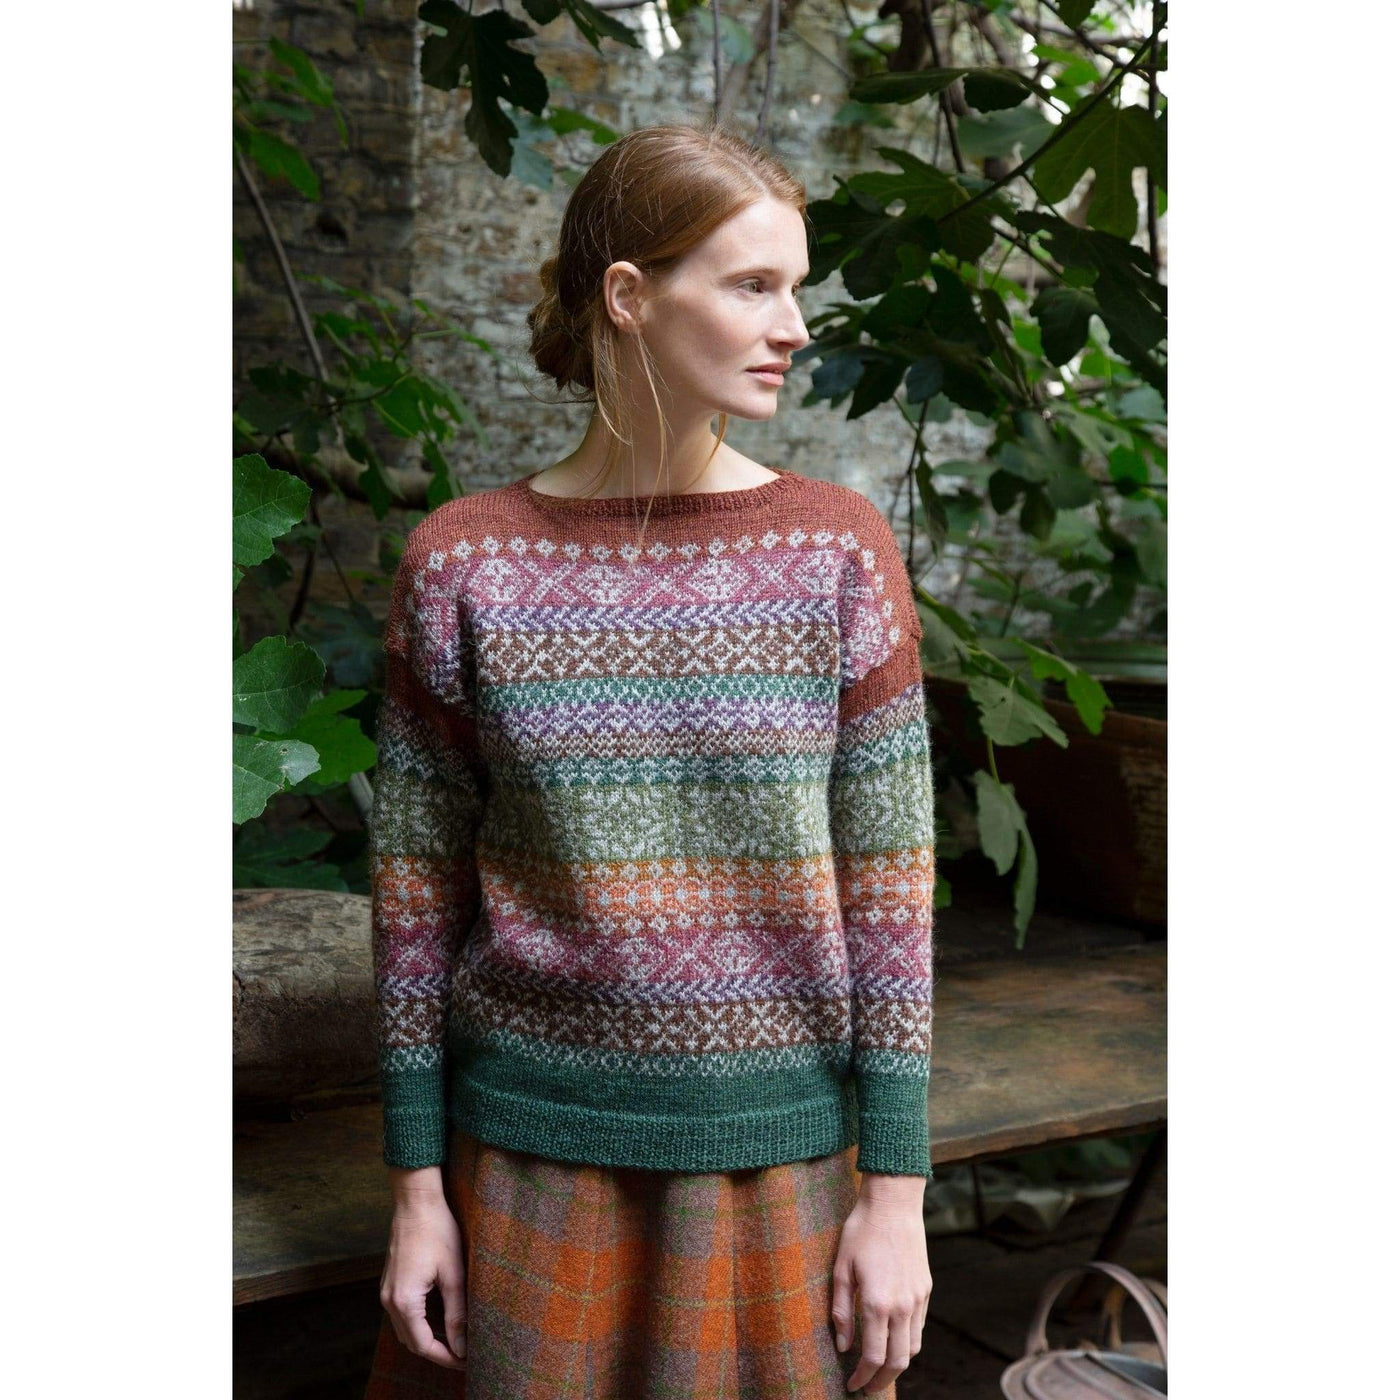 The Woolly Thistle Sinead Yarn Set in Marie Wallin's British Breeds from CHERISH featuring woman wearing Sinead sweater